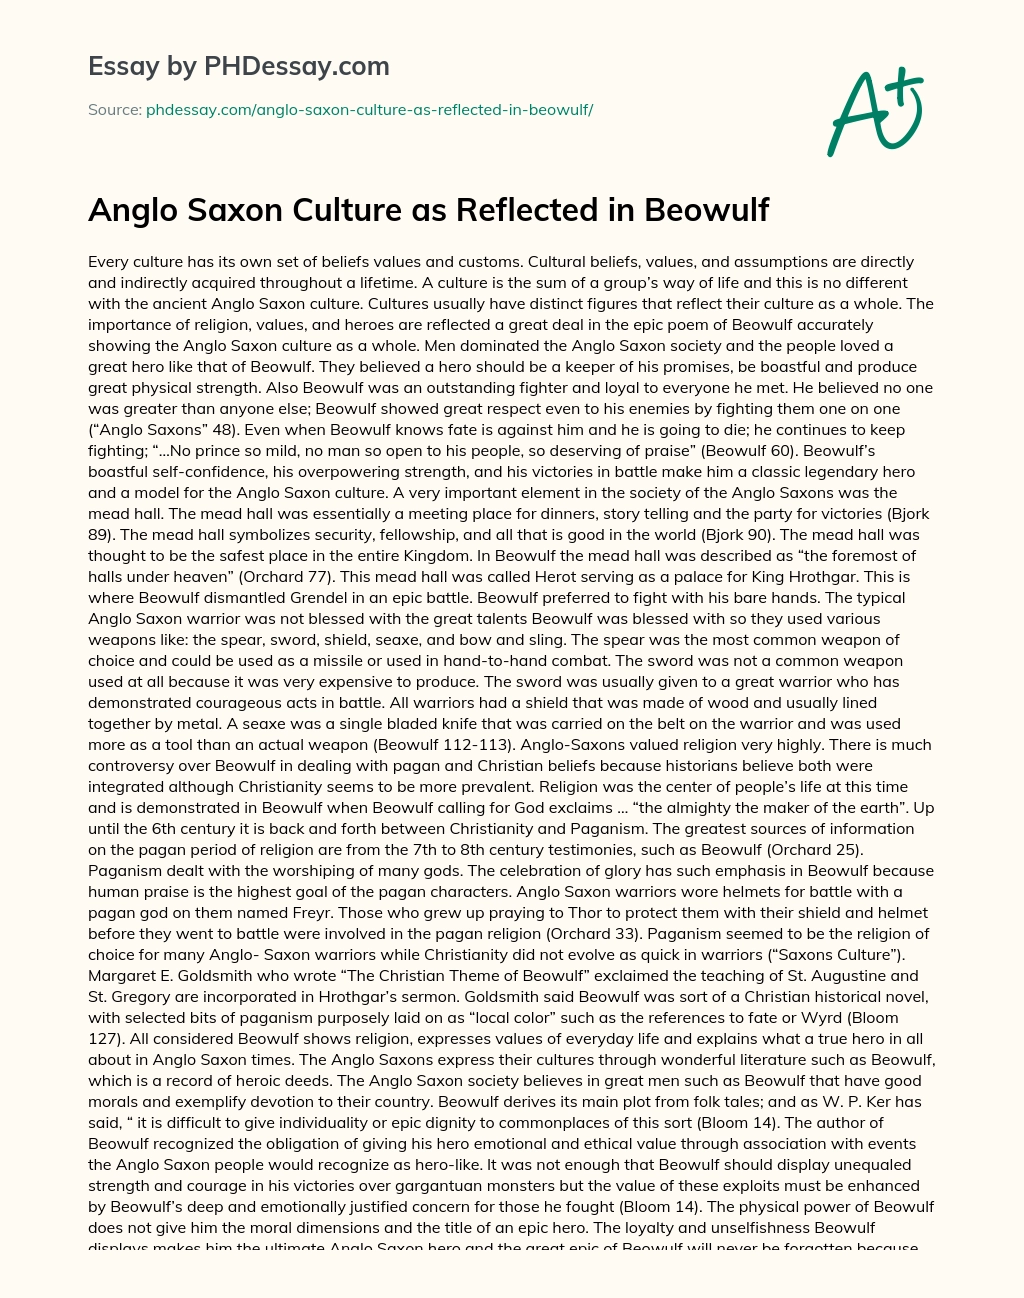 Anglo Saxon Culture as Reflected in Beowulf essay